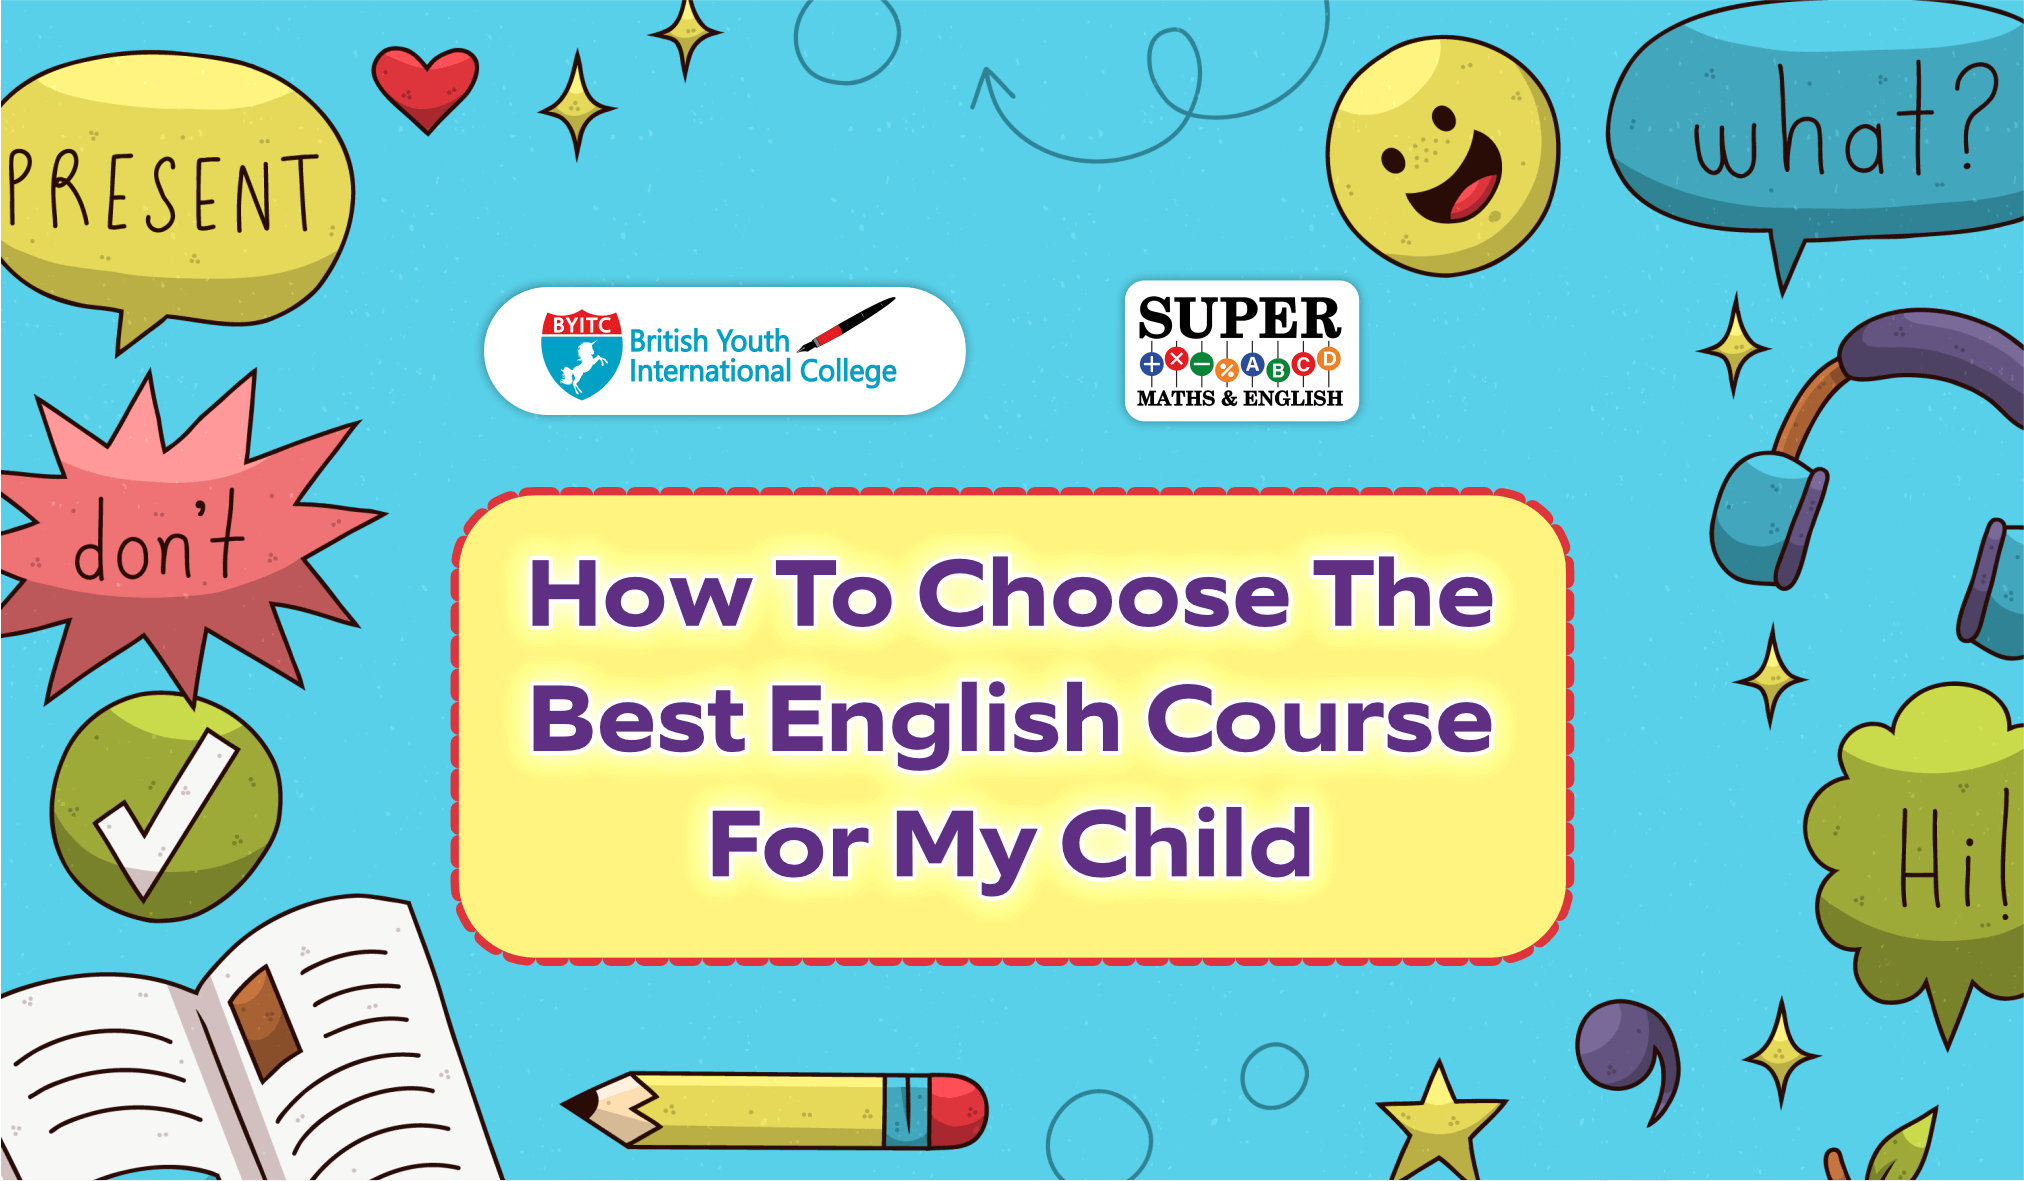 How to choose the best English Course for my Child